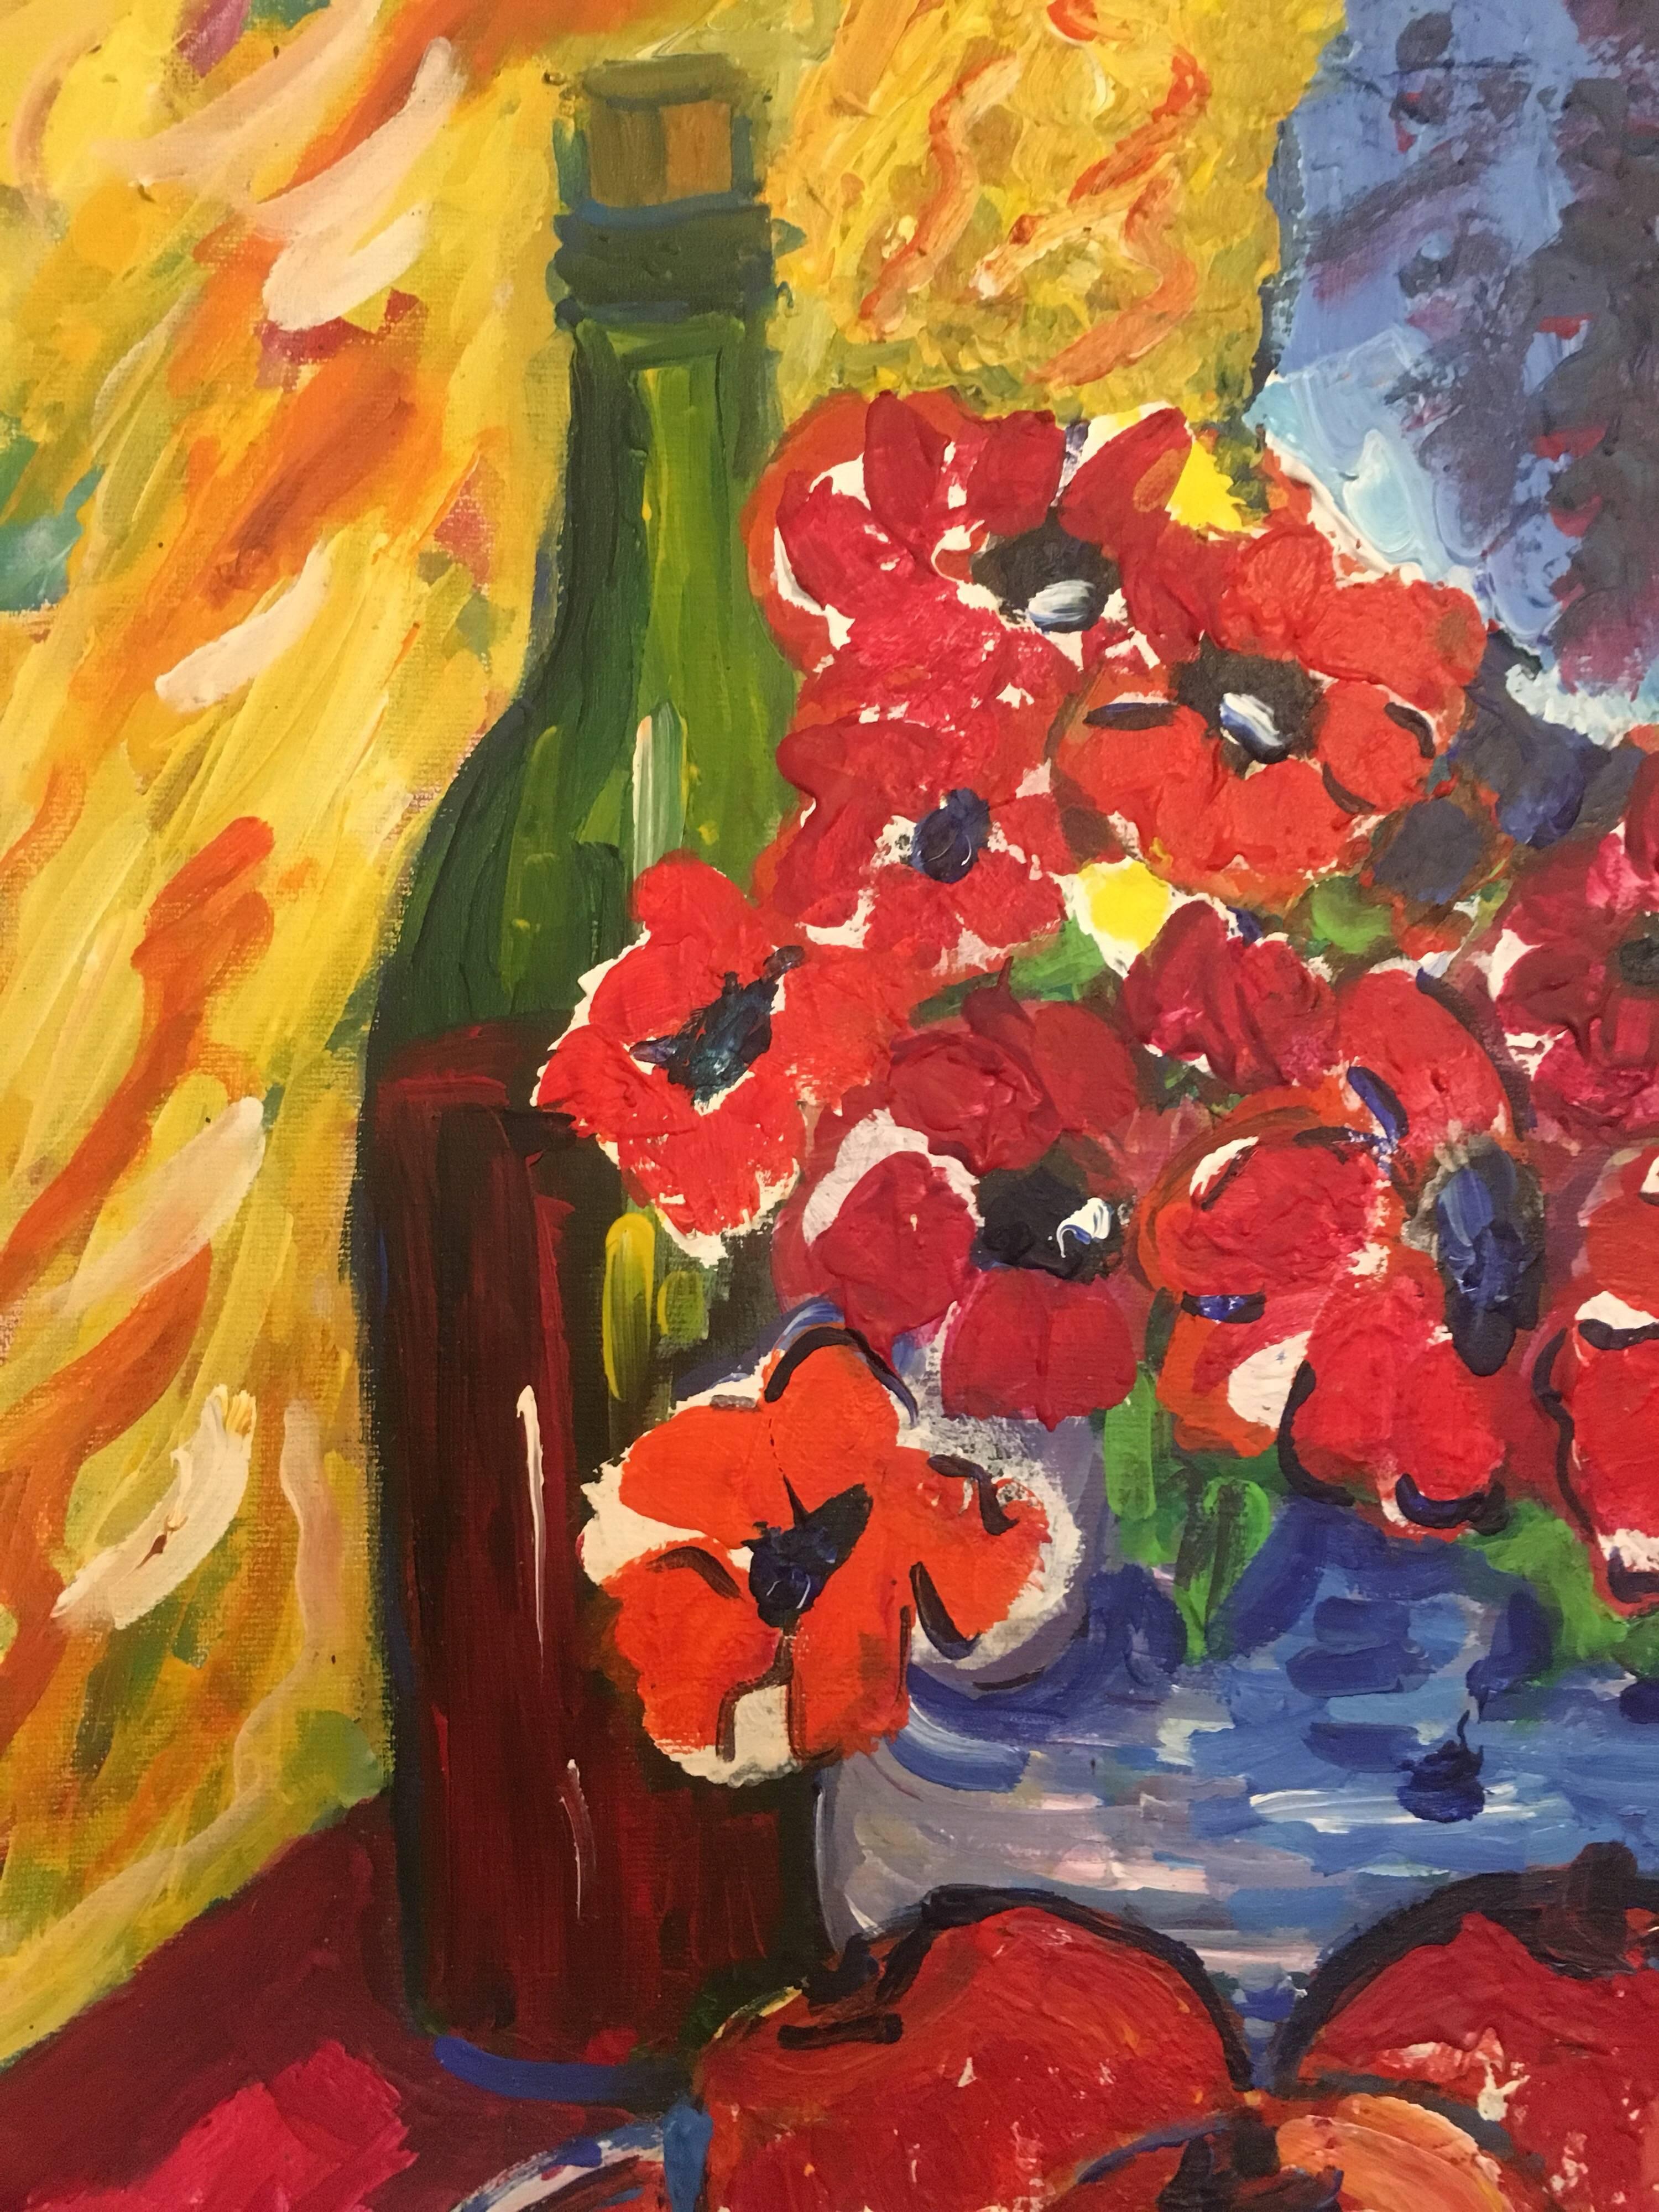 Flowers, Fruit and Wine, Still Life Oil Painting 2